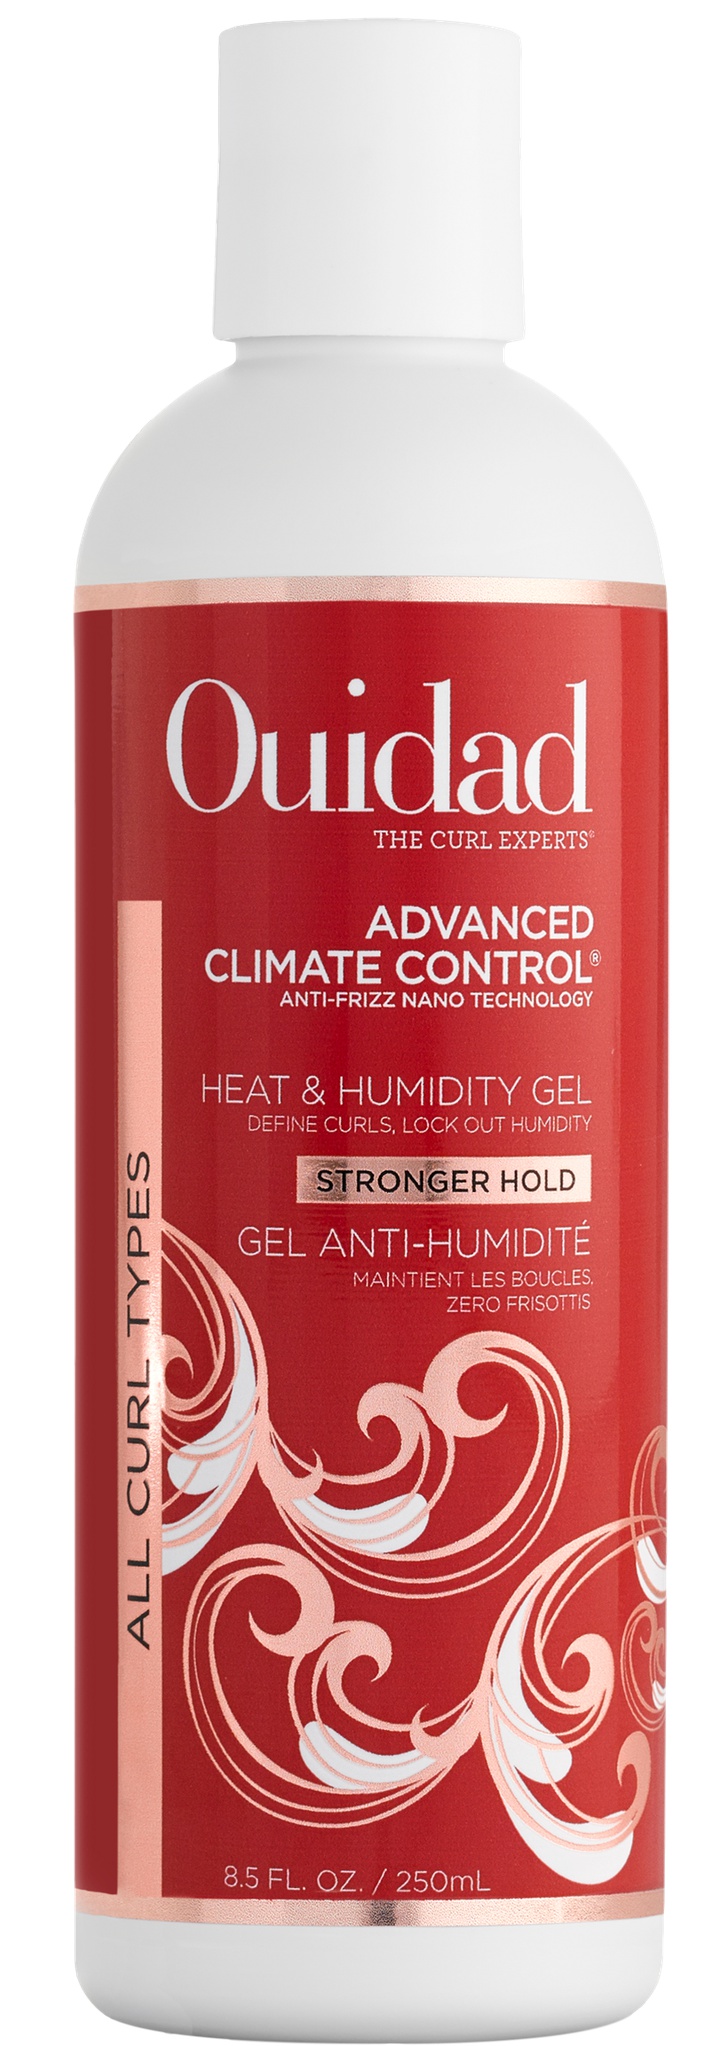 Ouidad Heat & Humidity Gel - Stronger Hold